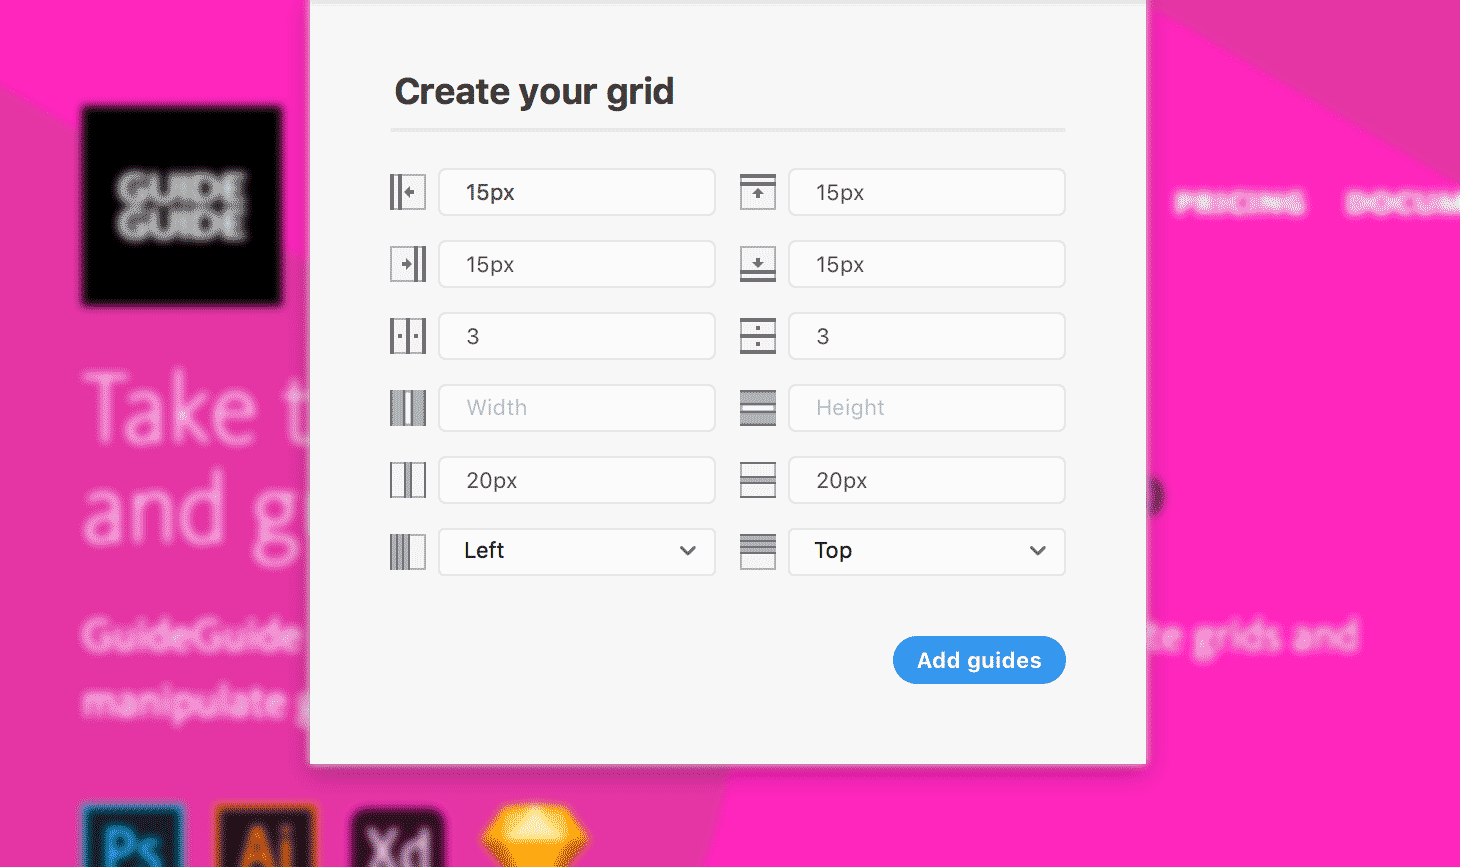 A screenshot showing the GuideGuide grid form over an Adobe XD document.